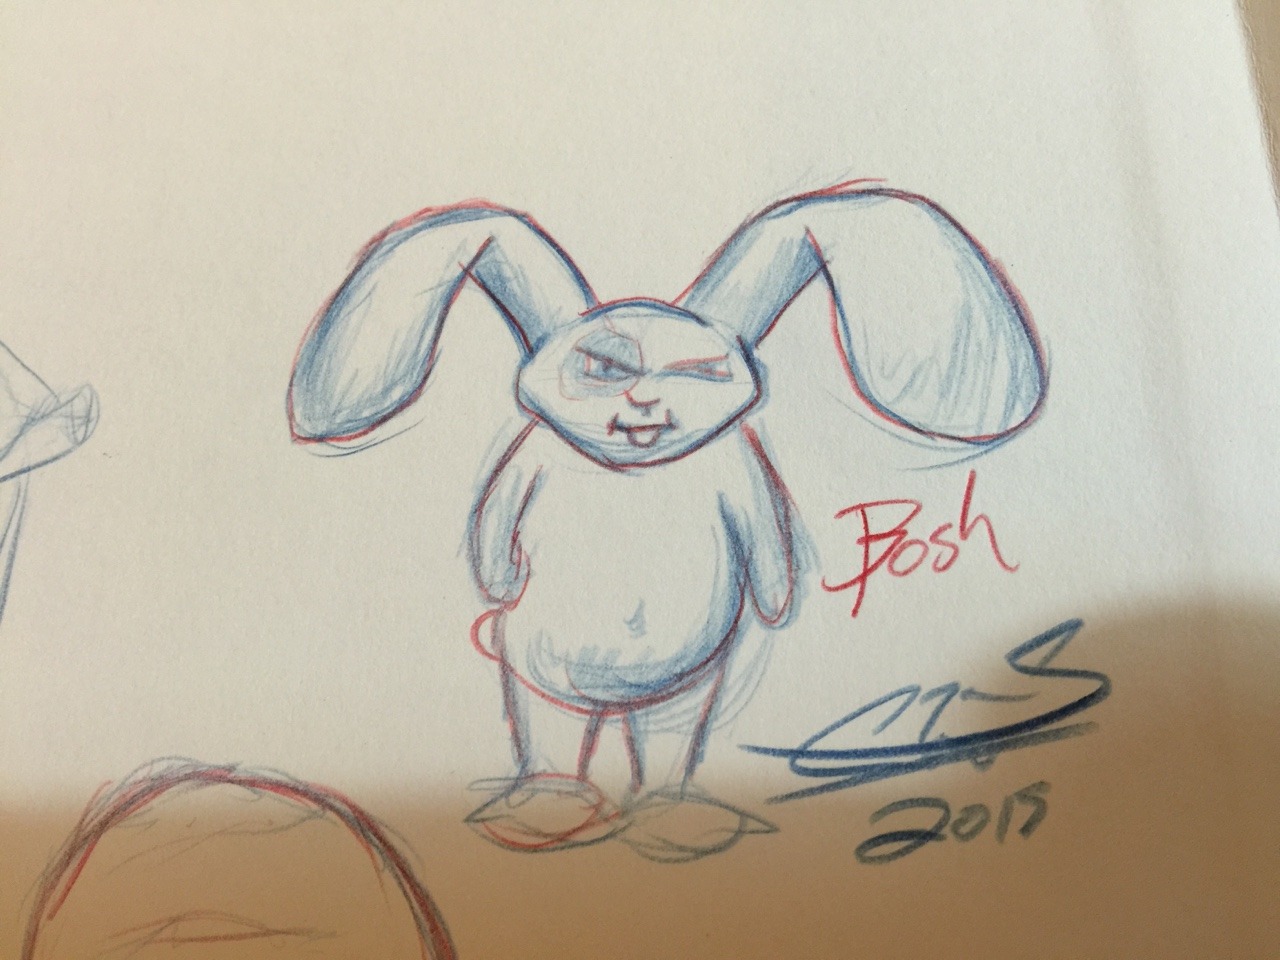 Another Bosh doodle. Ears down.